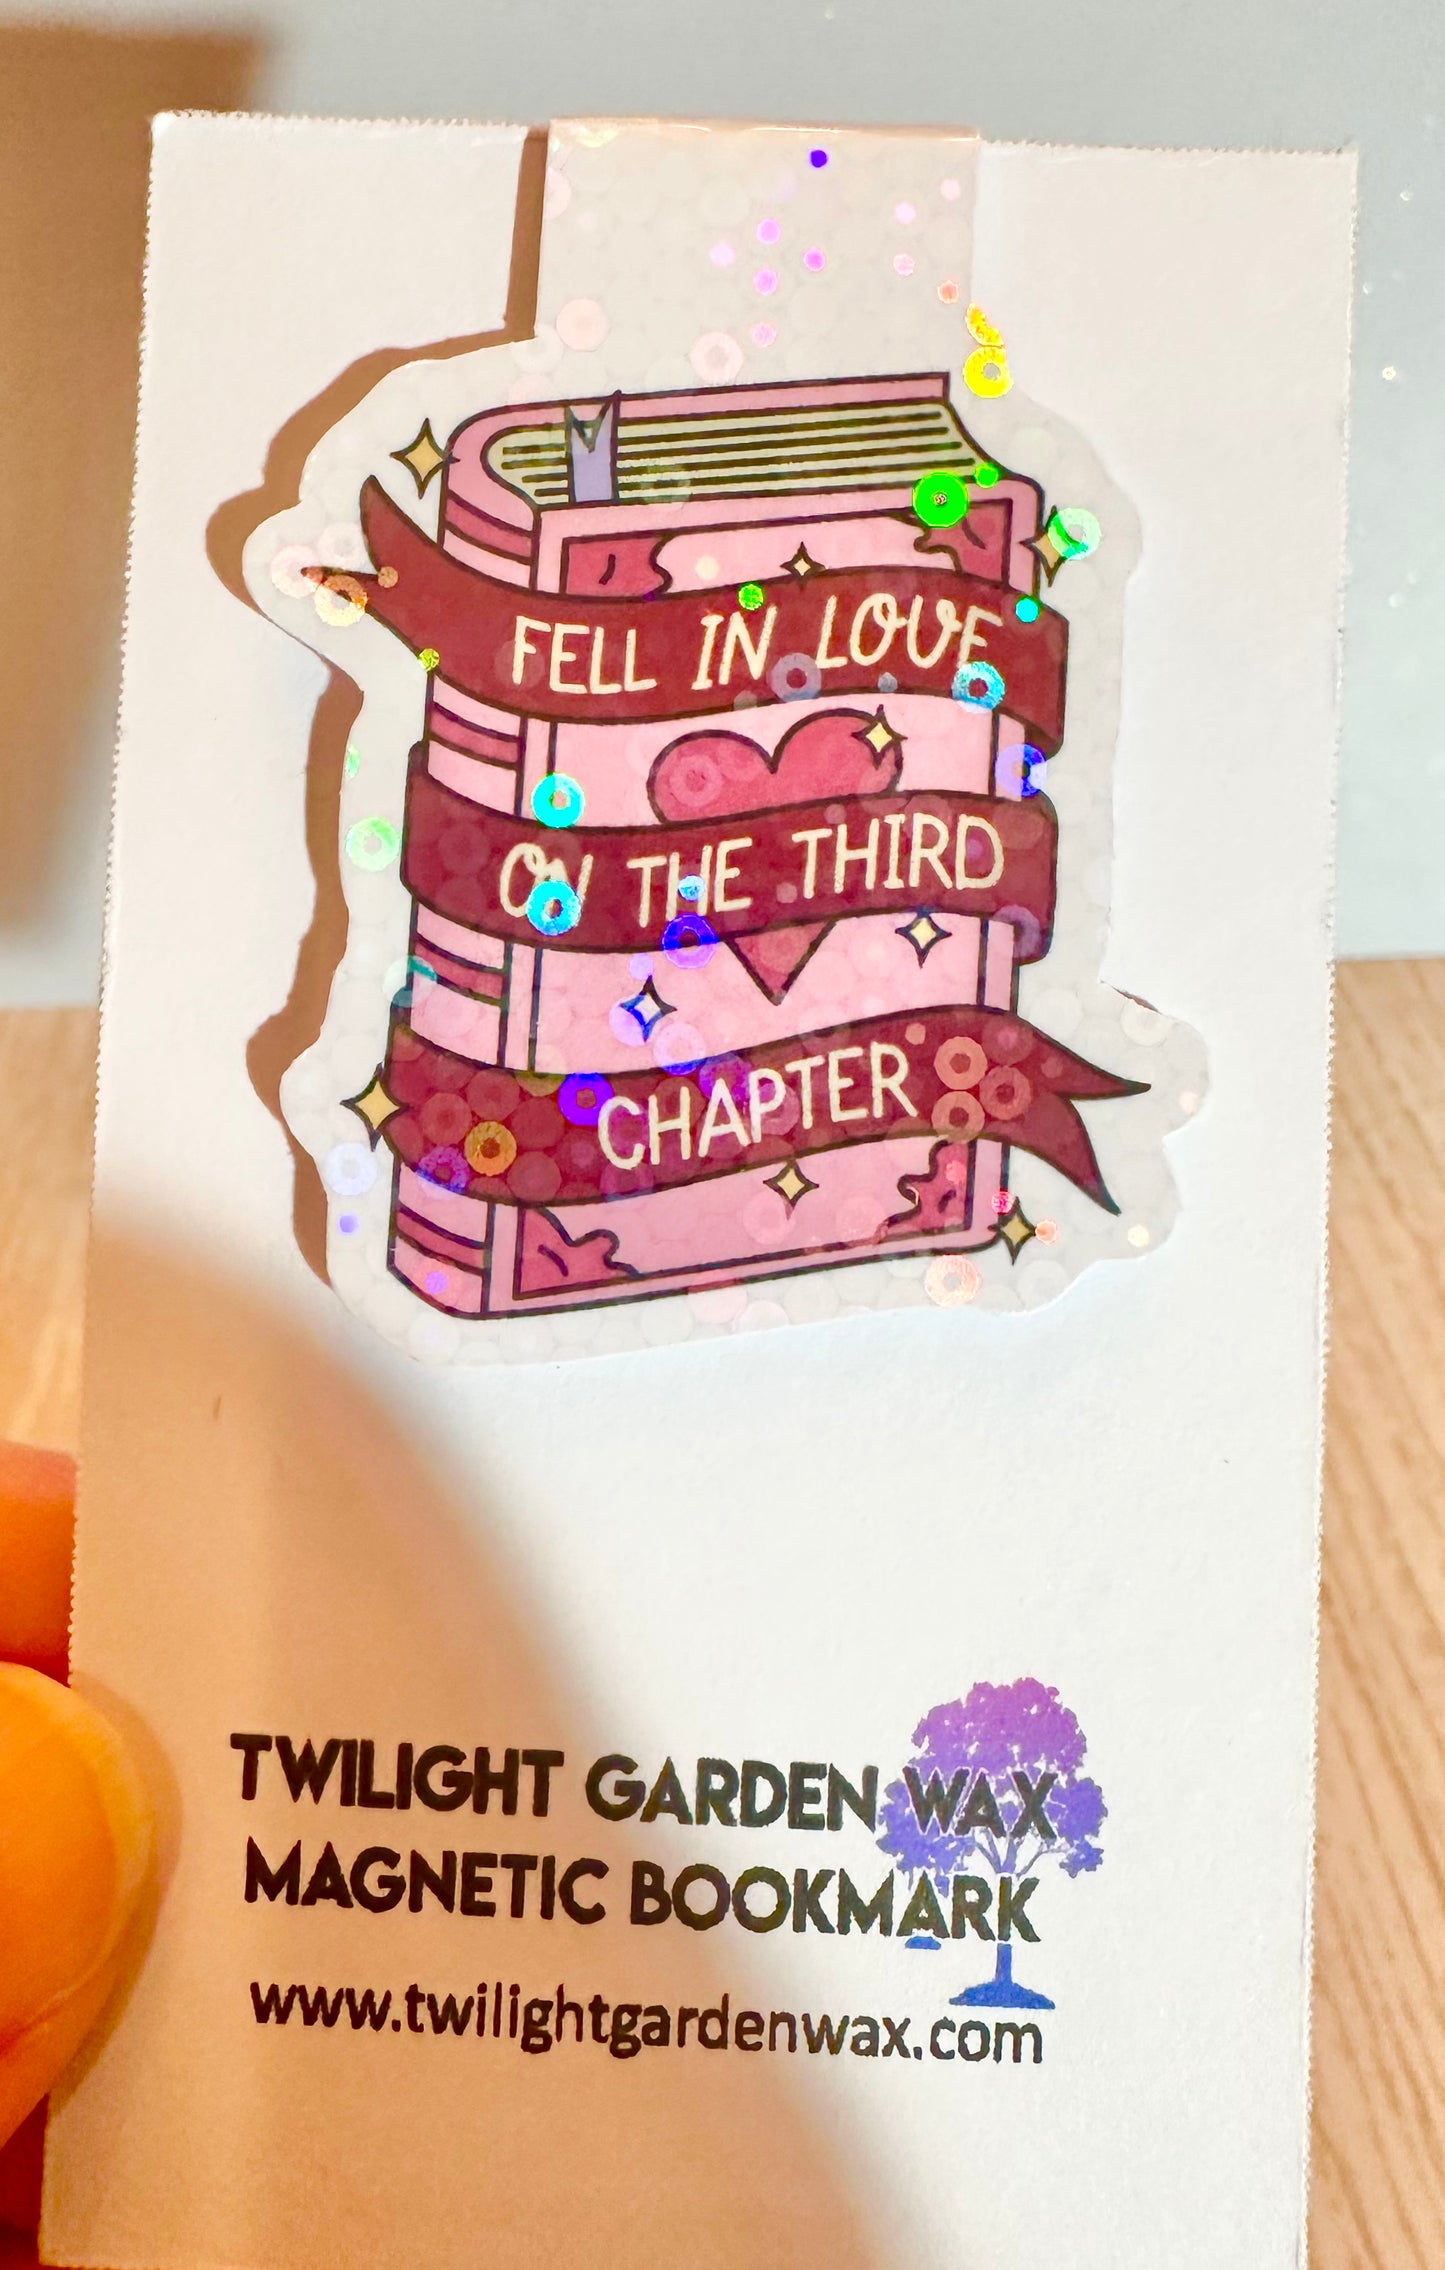 Fell in Love on the Third Chapter Magnetic Bookmark